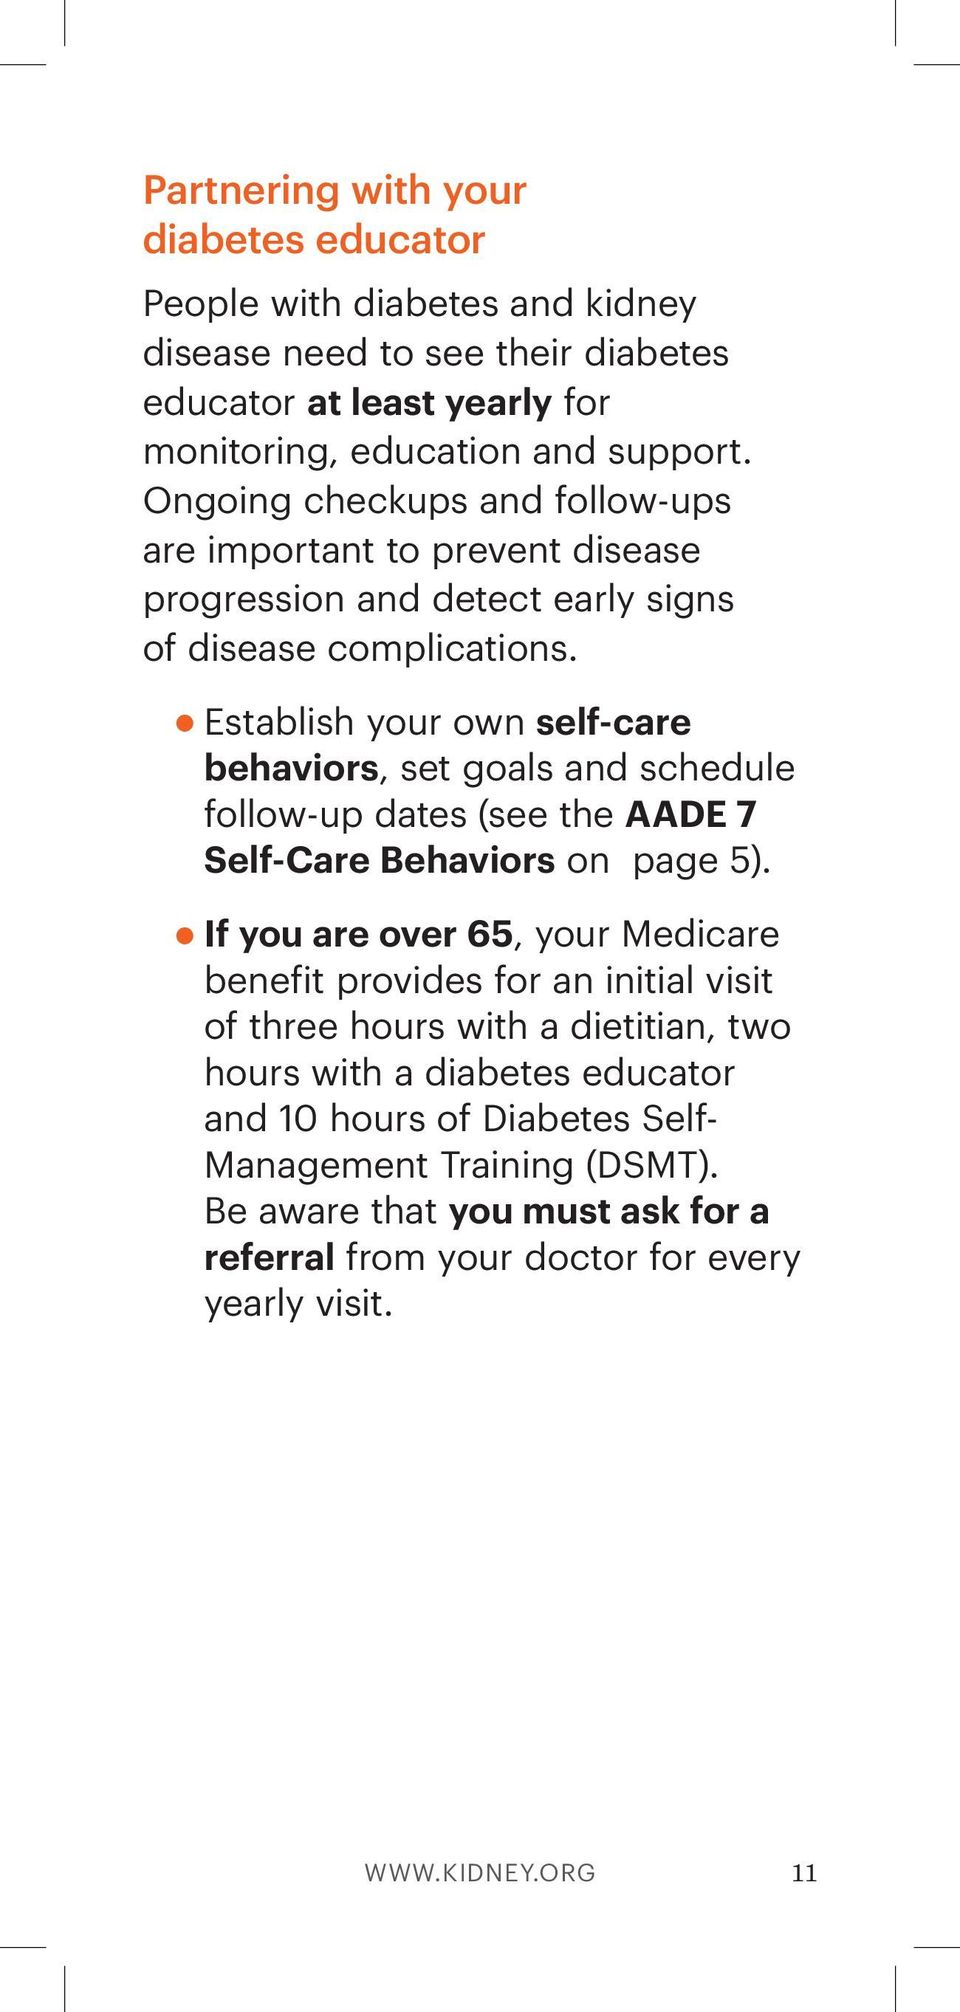 Establish your own self-care behaviors, set goals and schedule follow-up dates (see the AADE 7 Self-Care Behaviors on page 5).